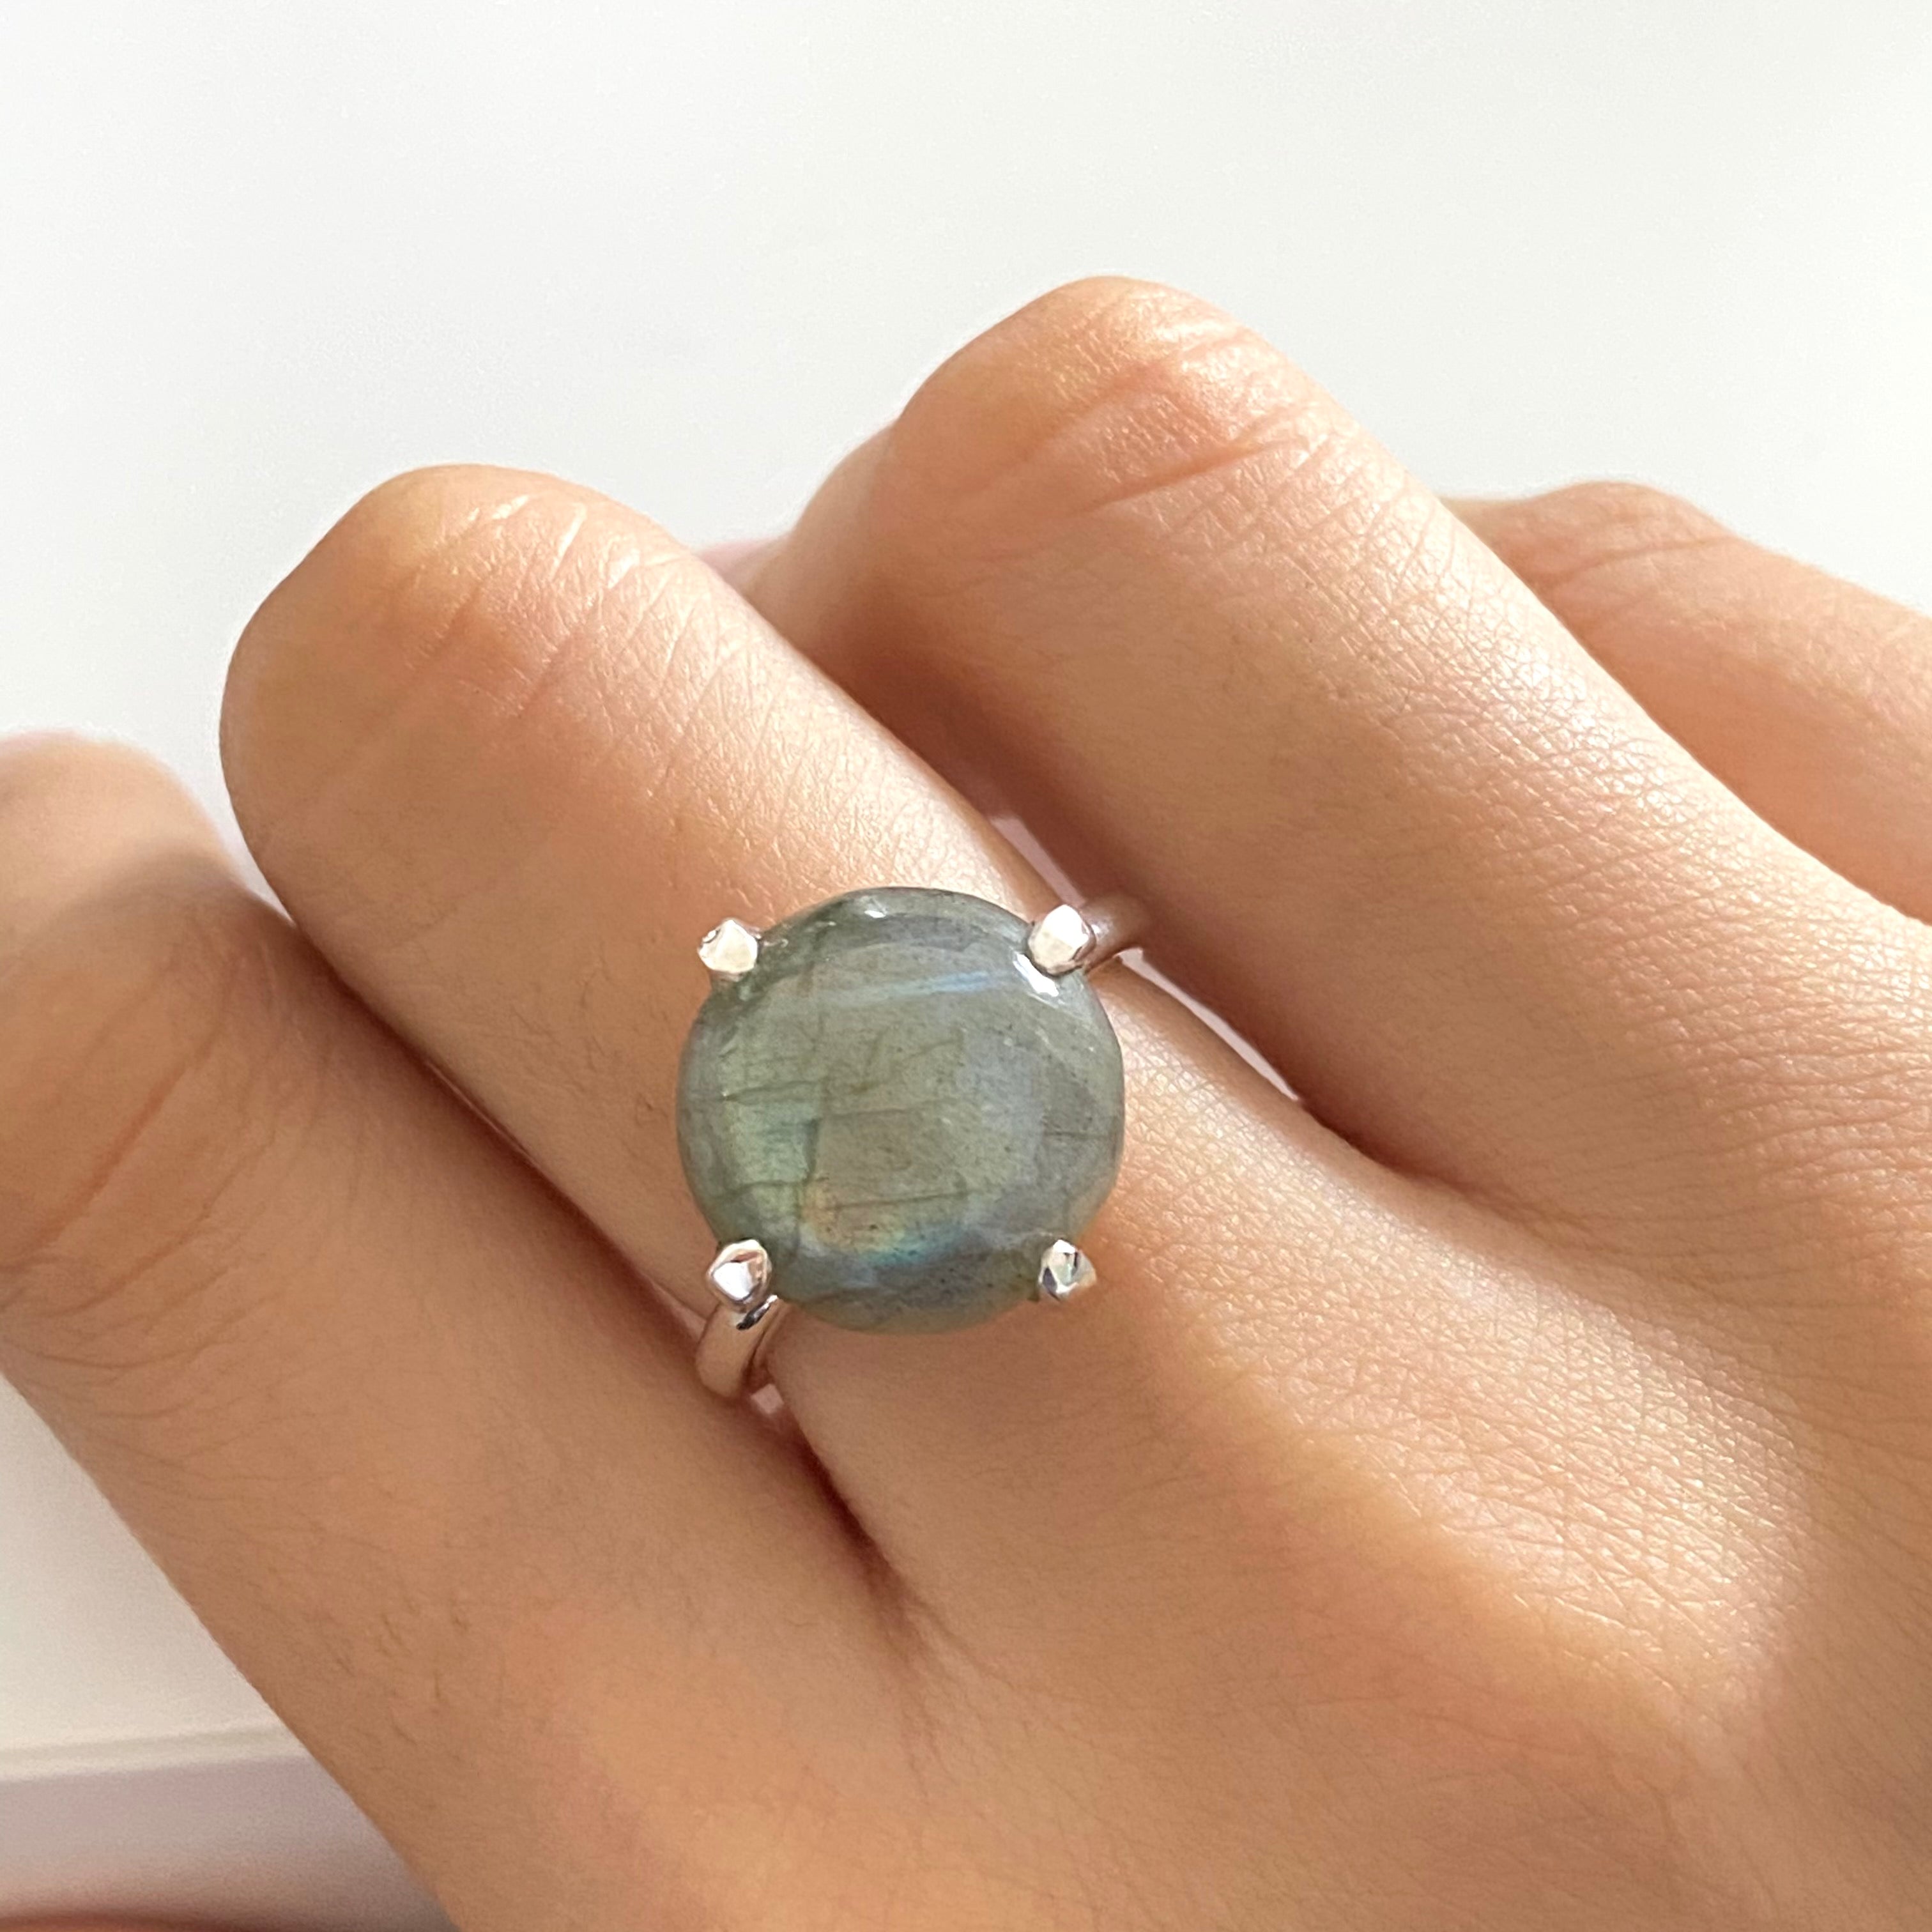 Round Cabochon Labradorite Ring in Sterling Silver